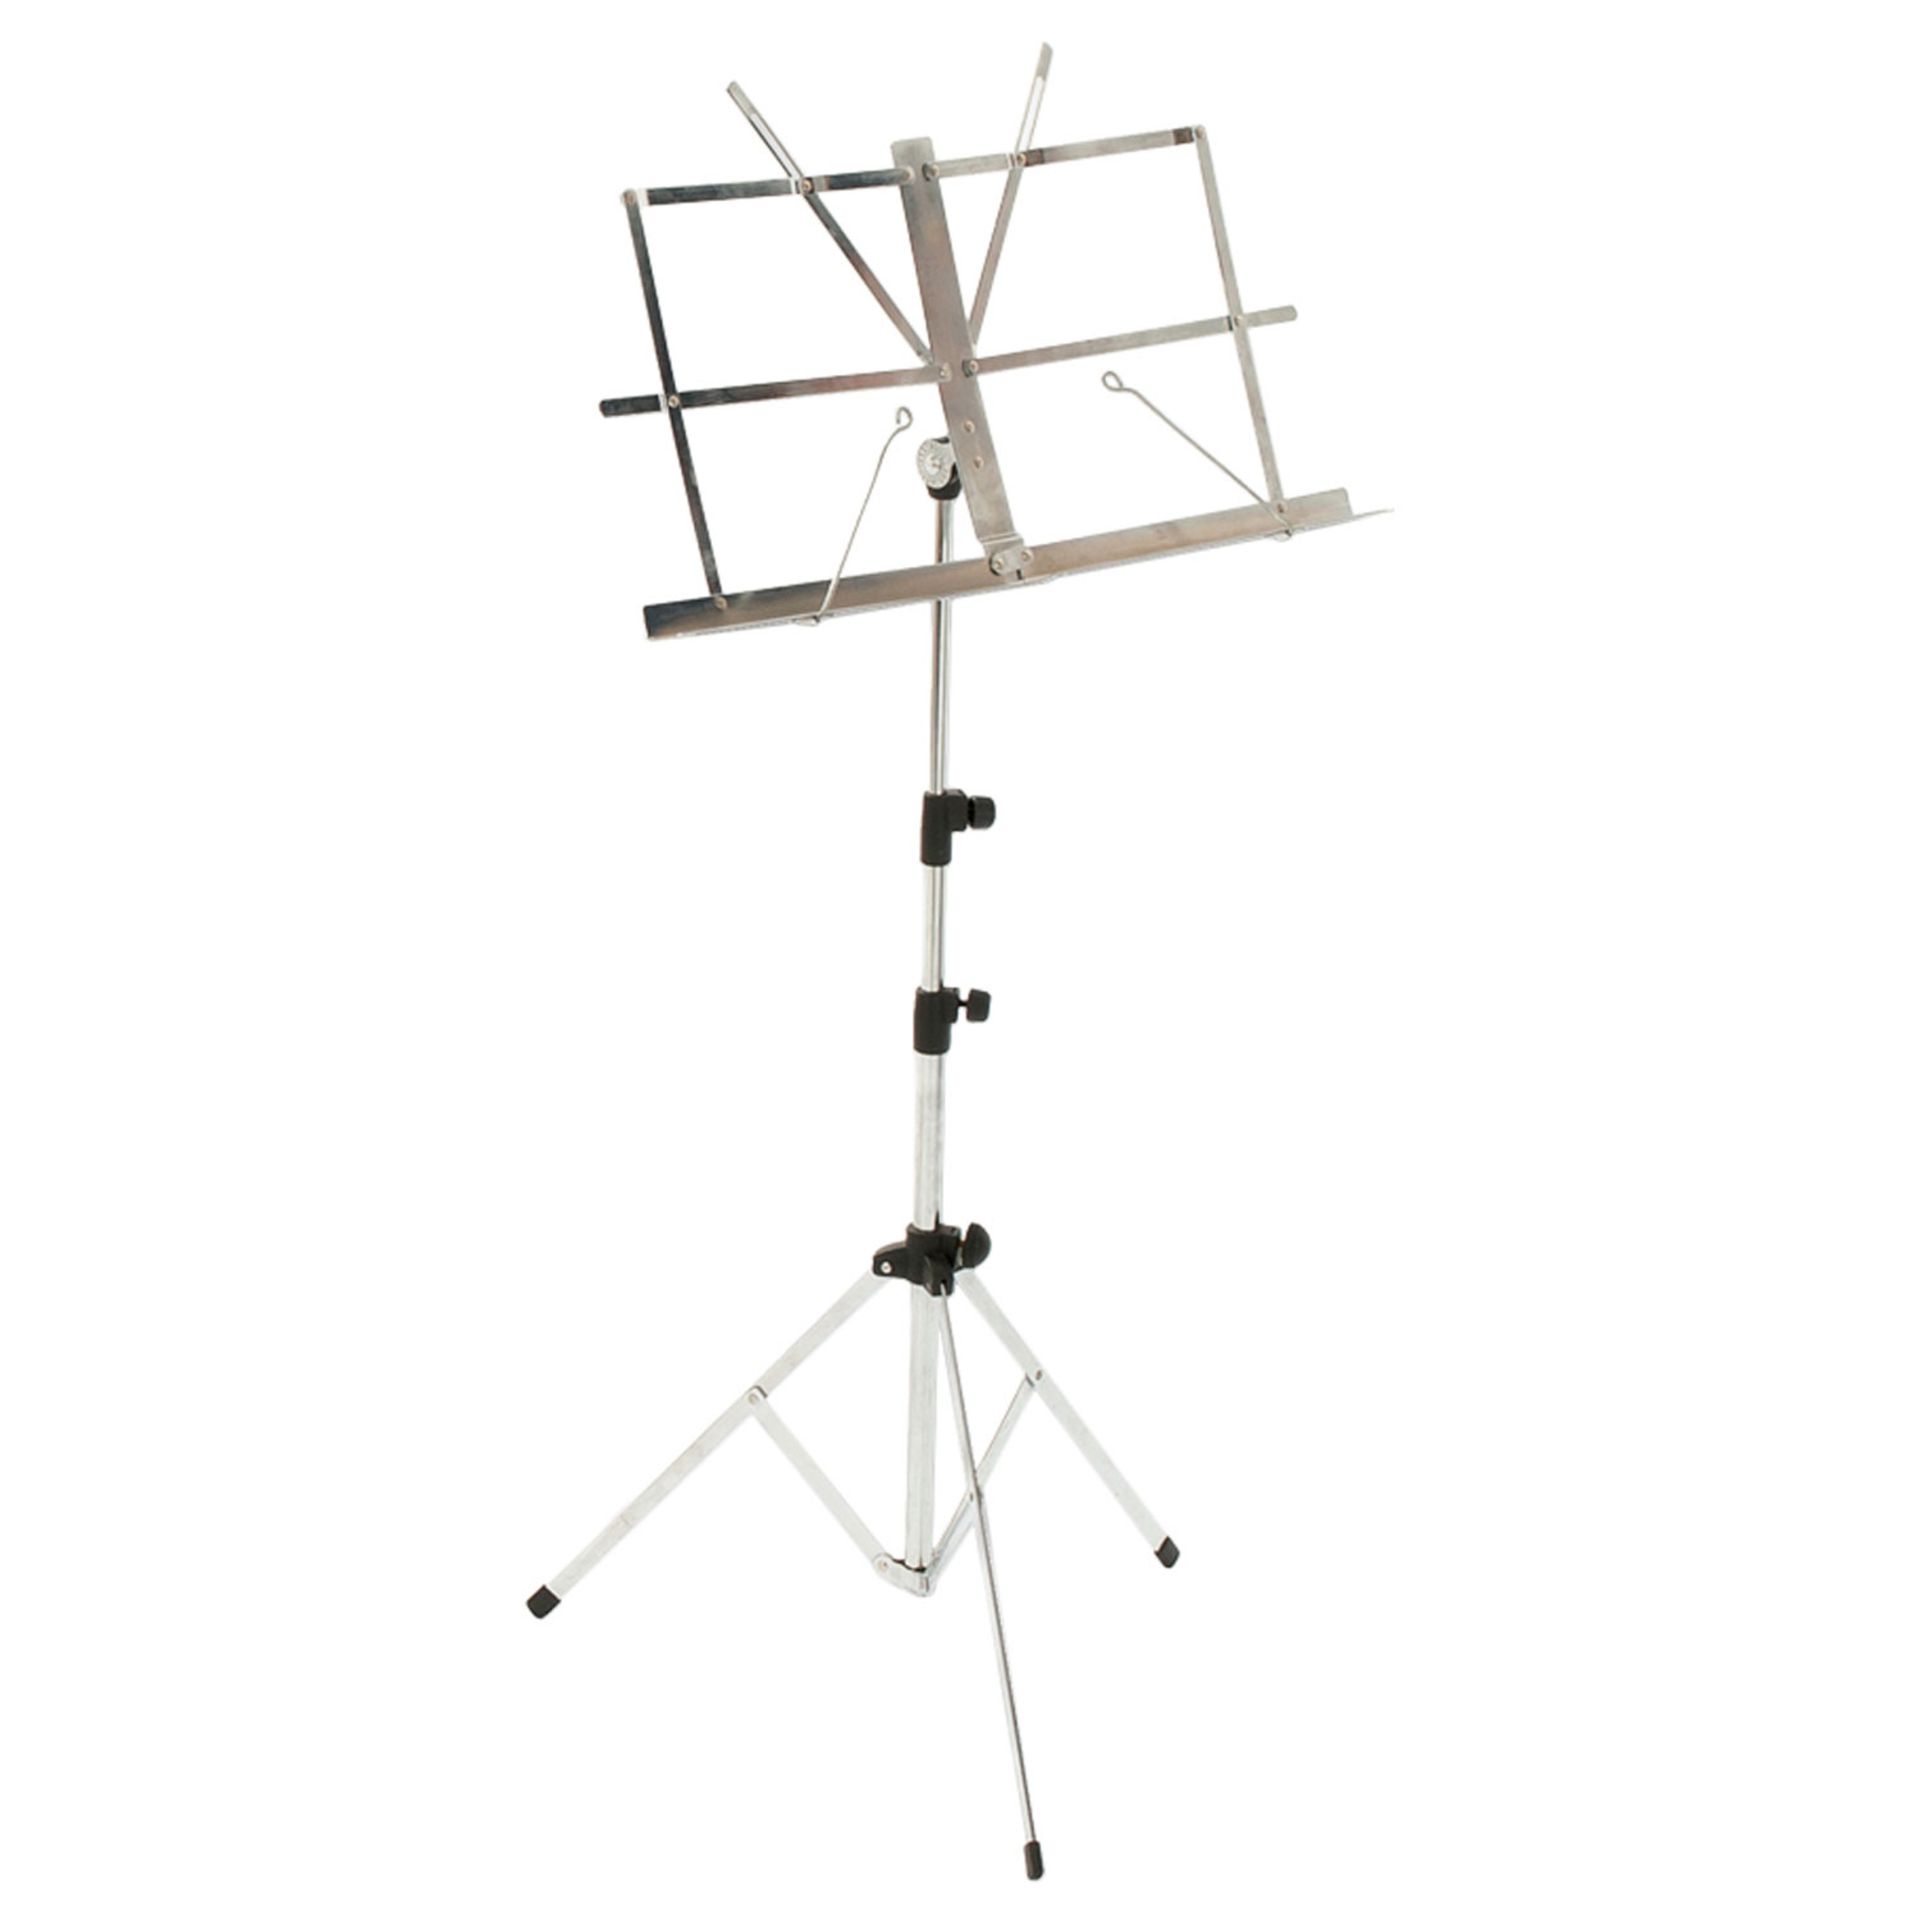 + VAT Brand New Music Stand Black (Image Similar To Item) ISP £16 (Percussion Company) - Image 2 of 2